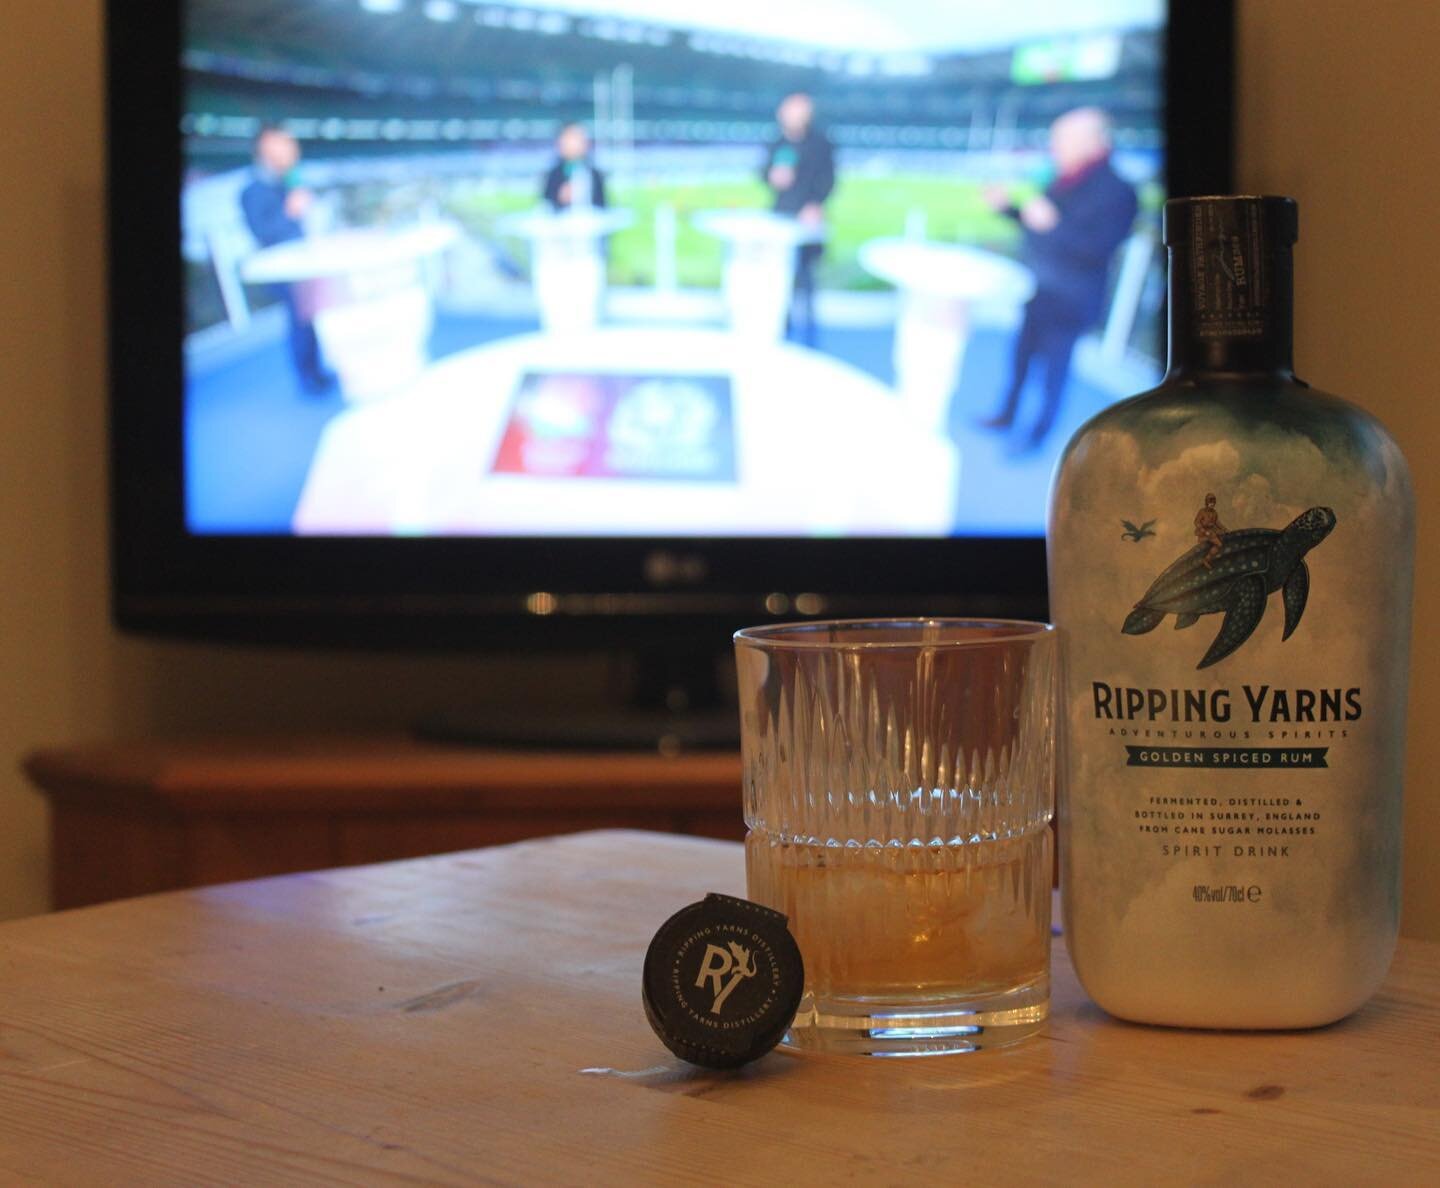 150th Calcutta Cup! Enjoying the start of the Six Nations with some of our Rum on the rocks. Who are you backing? 🏴󠁧󠁢󠁥󠁮󠁧󠁿 or 🏴󠁧󠁢󠁳󠁣󠁴󠁿? #rum #scotland #england #sixnations  #drink #premium #weekend #sport #fun #calcuttacup #friends #famil